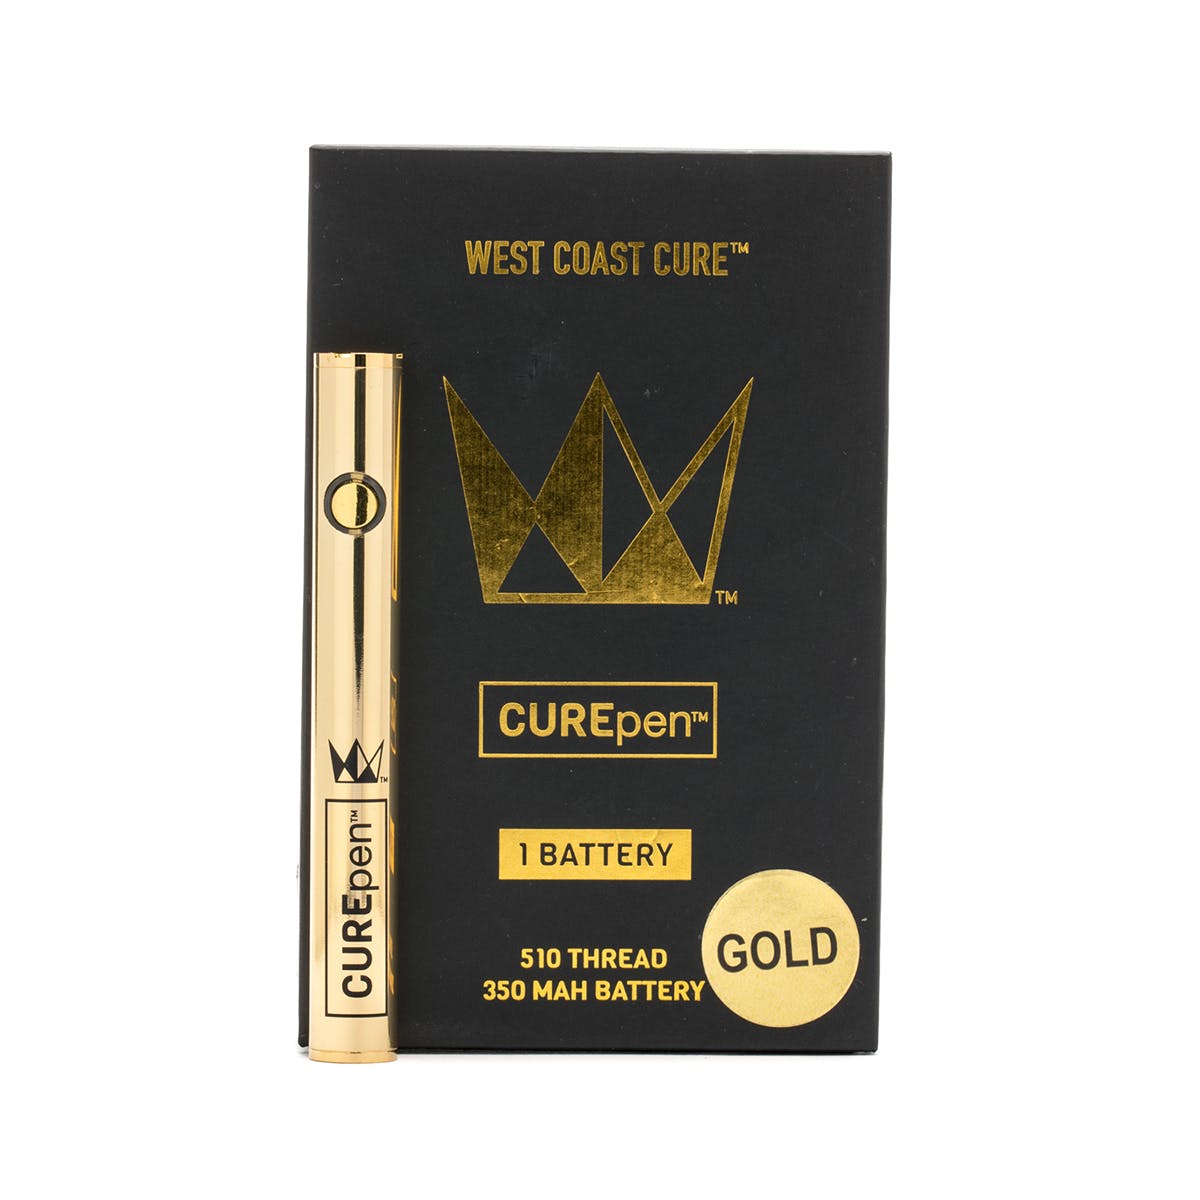 marijuana-dispensaries-baked-on-lincoln-in-anaheim-curepena-c2-84c-battery-gold